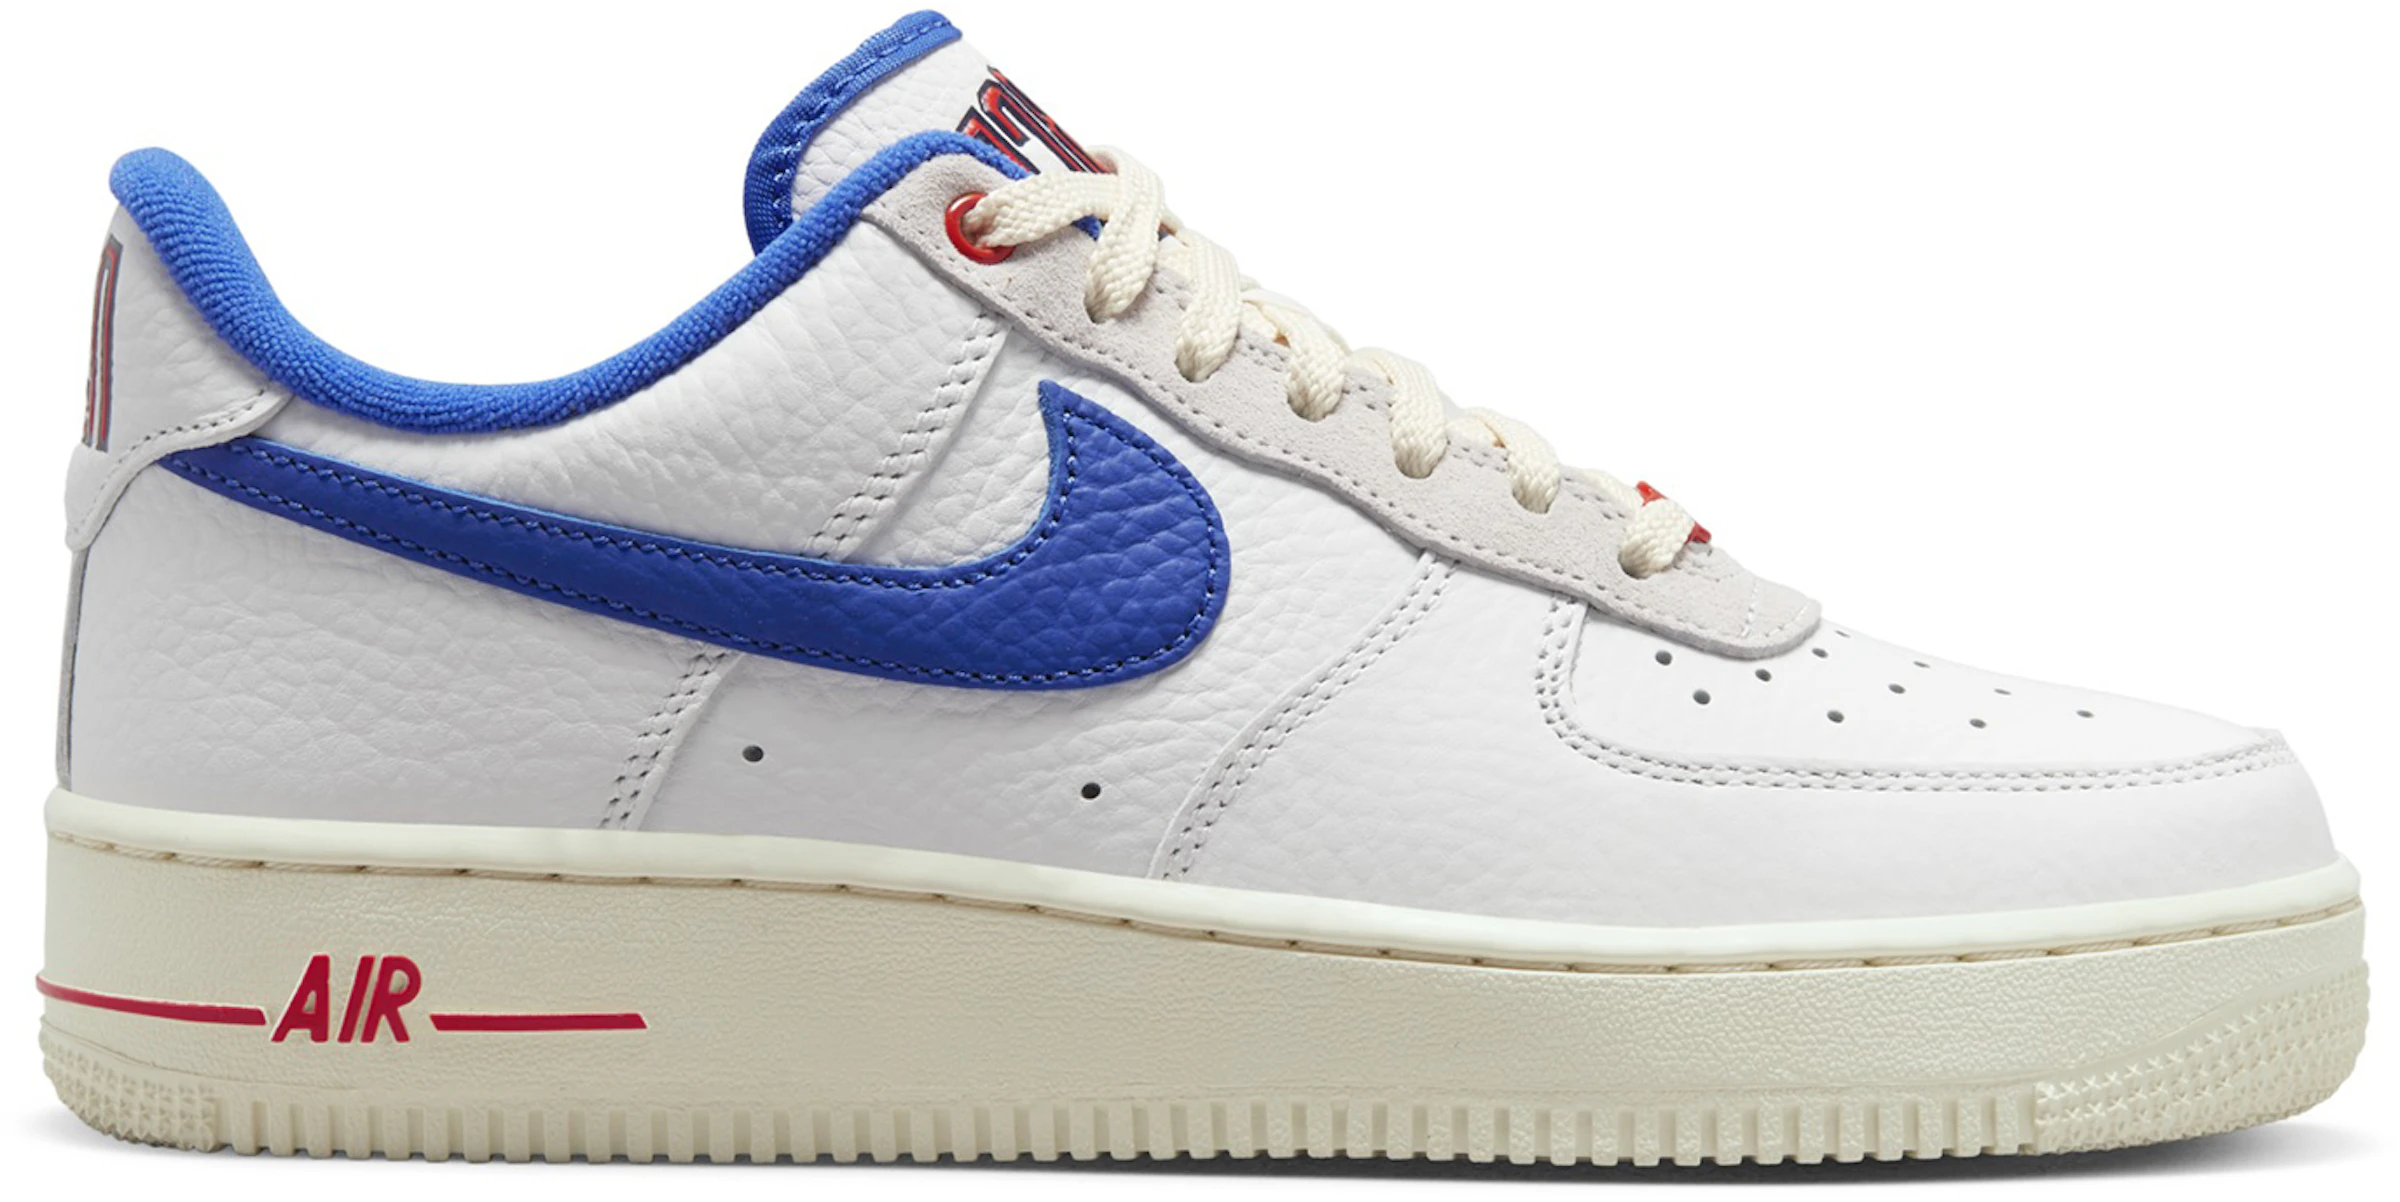 tuberculosis Juramento pastel Nike Air Force 1 '07 LX Low Command Force University Blue Summit White (W)  - DR0148-100 - ES